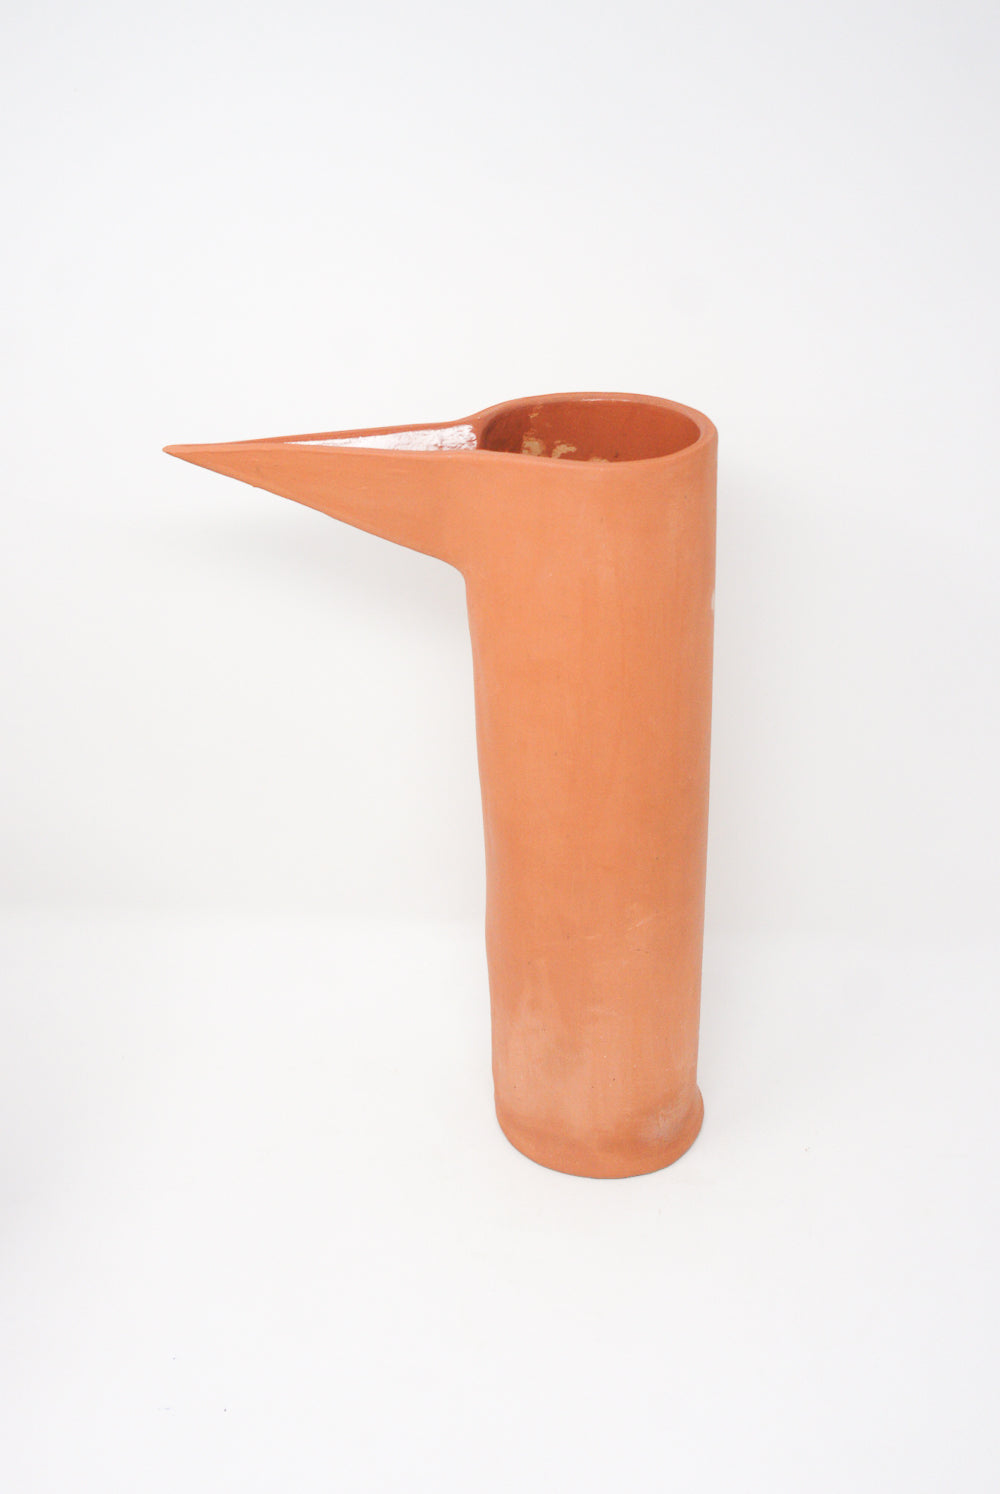 Handmade Beaker in Terracotta II with a long spout on a white background by Paula Greif.